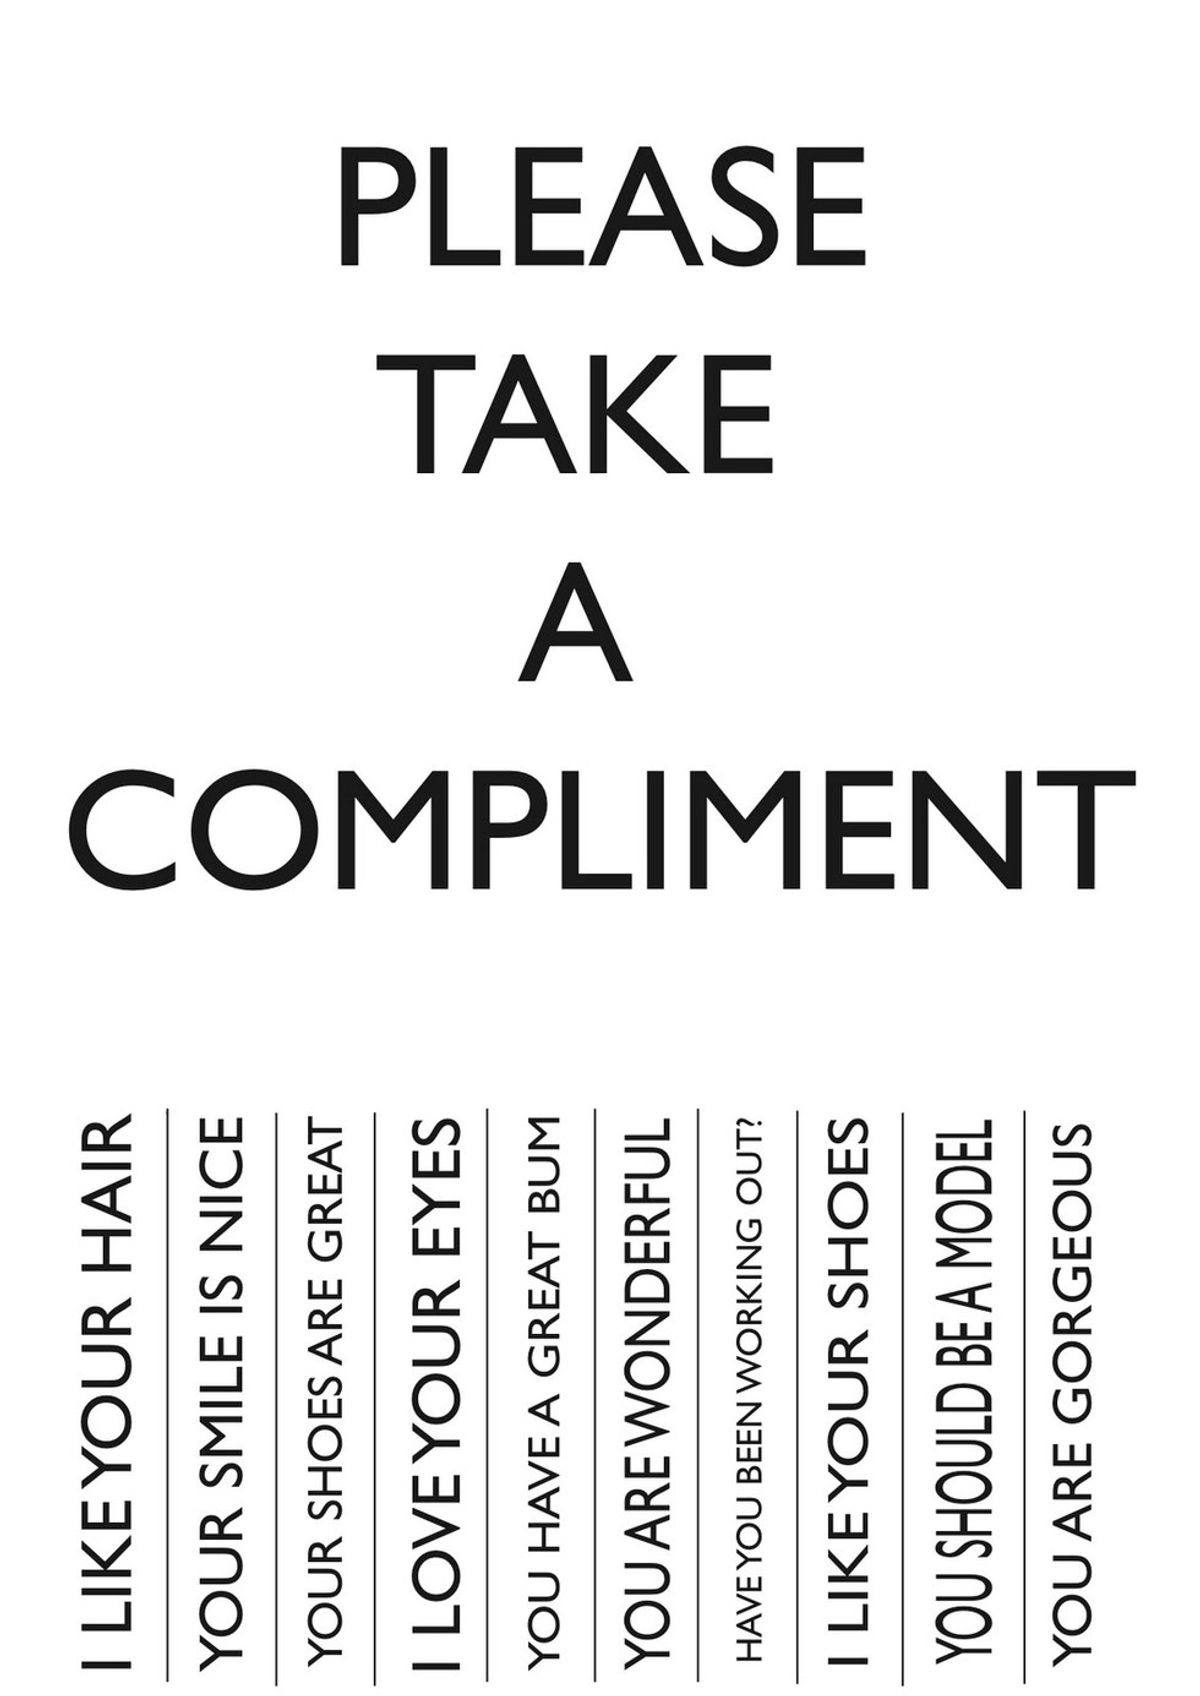 The Nature of Compliments: What People Say and What they Mean